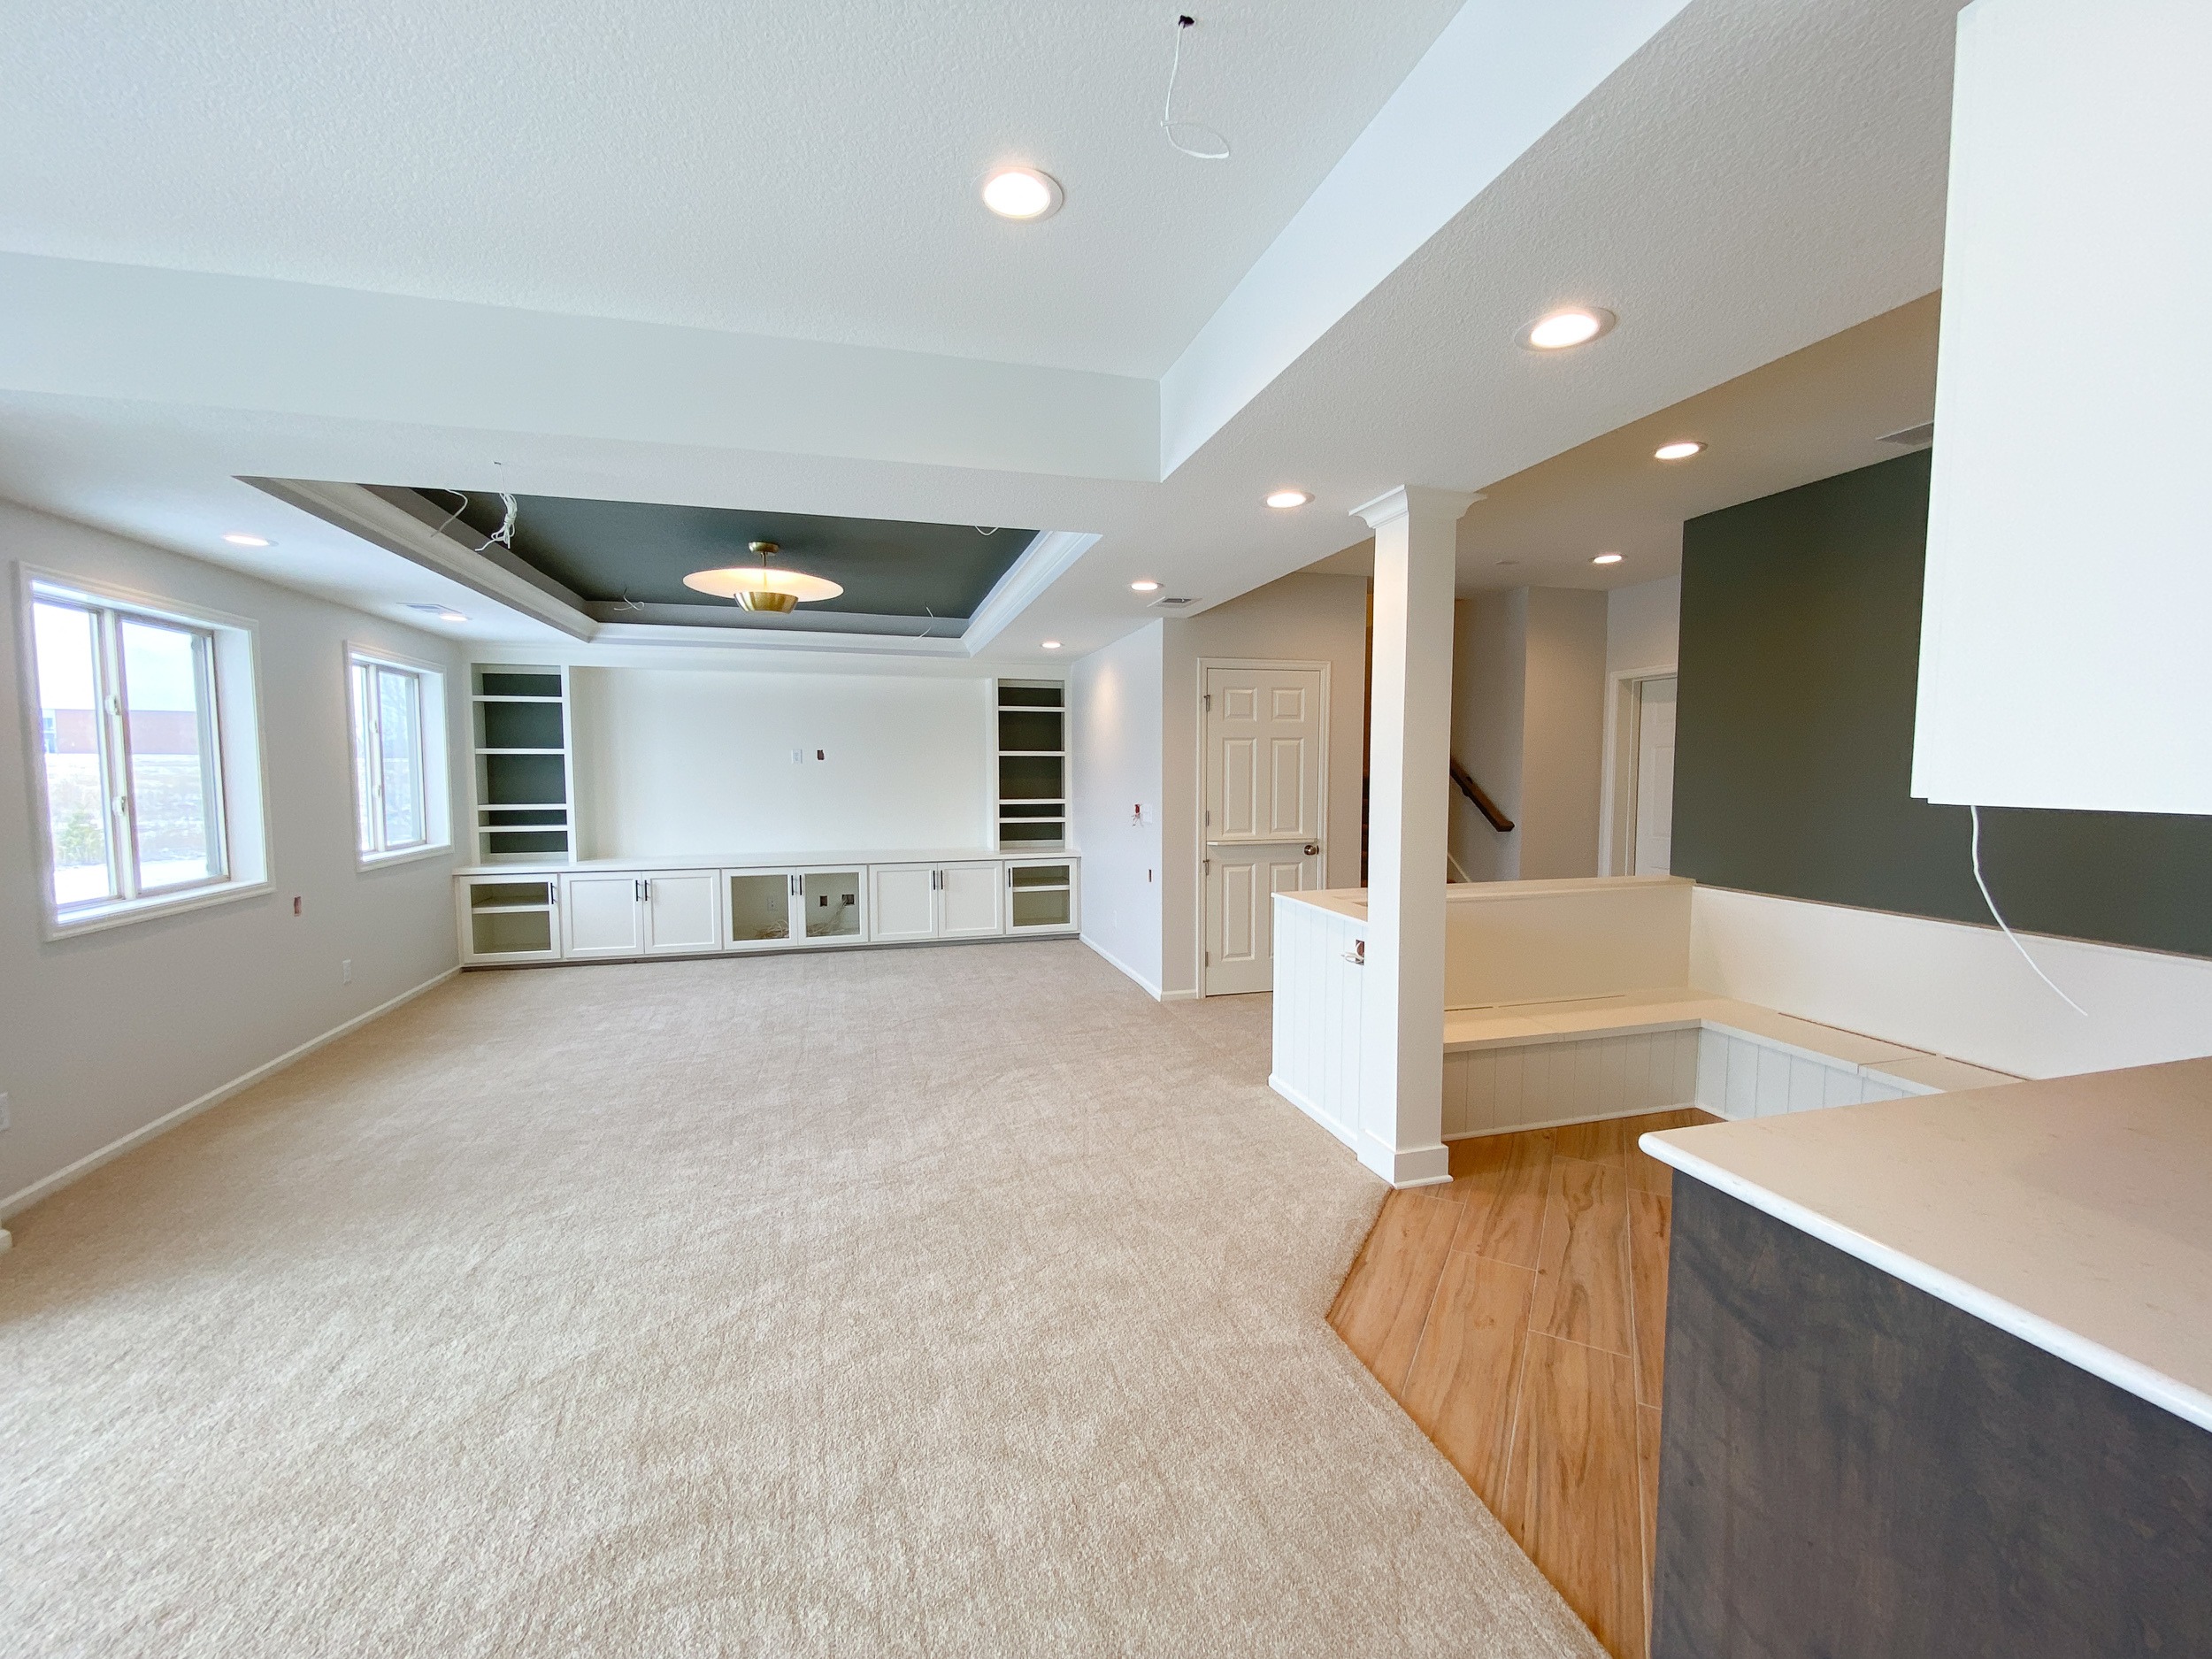 Basement Remodeling And Finishing Contractors In Kansas City